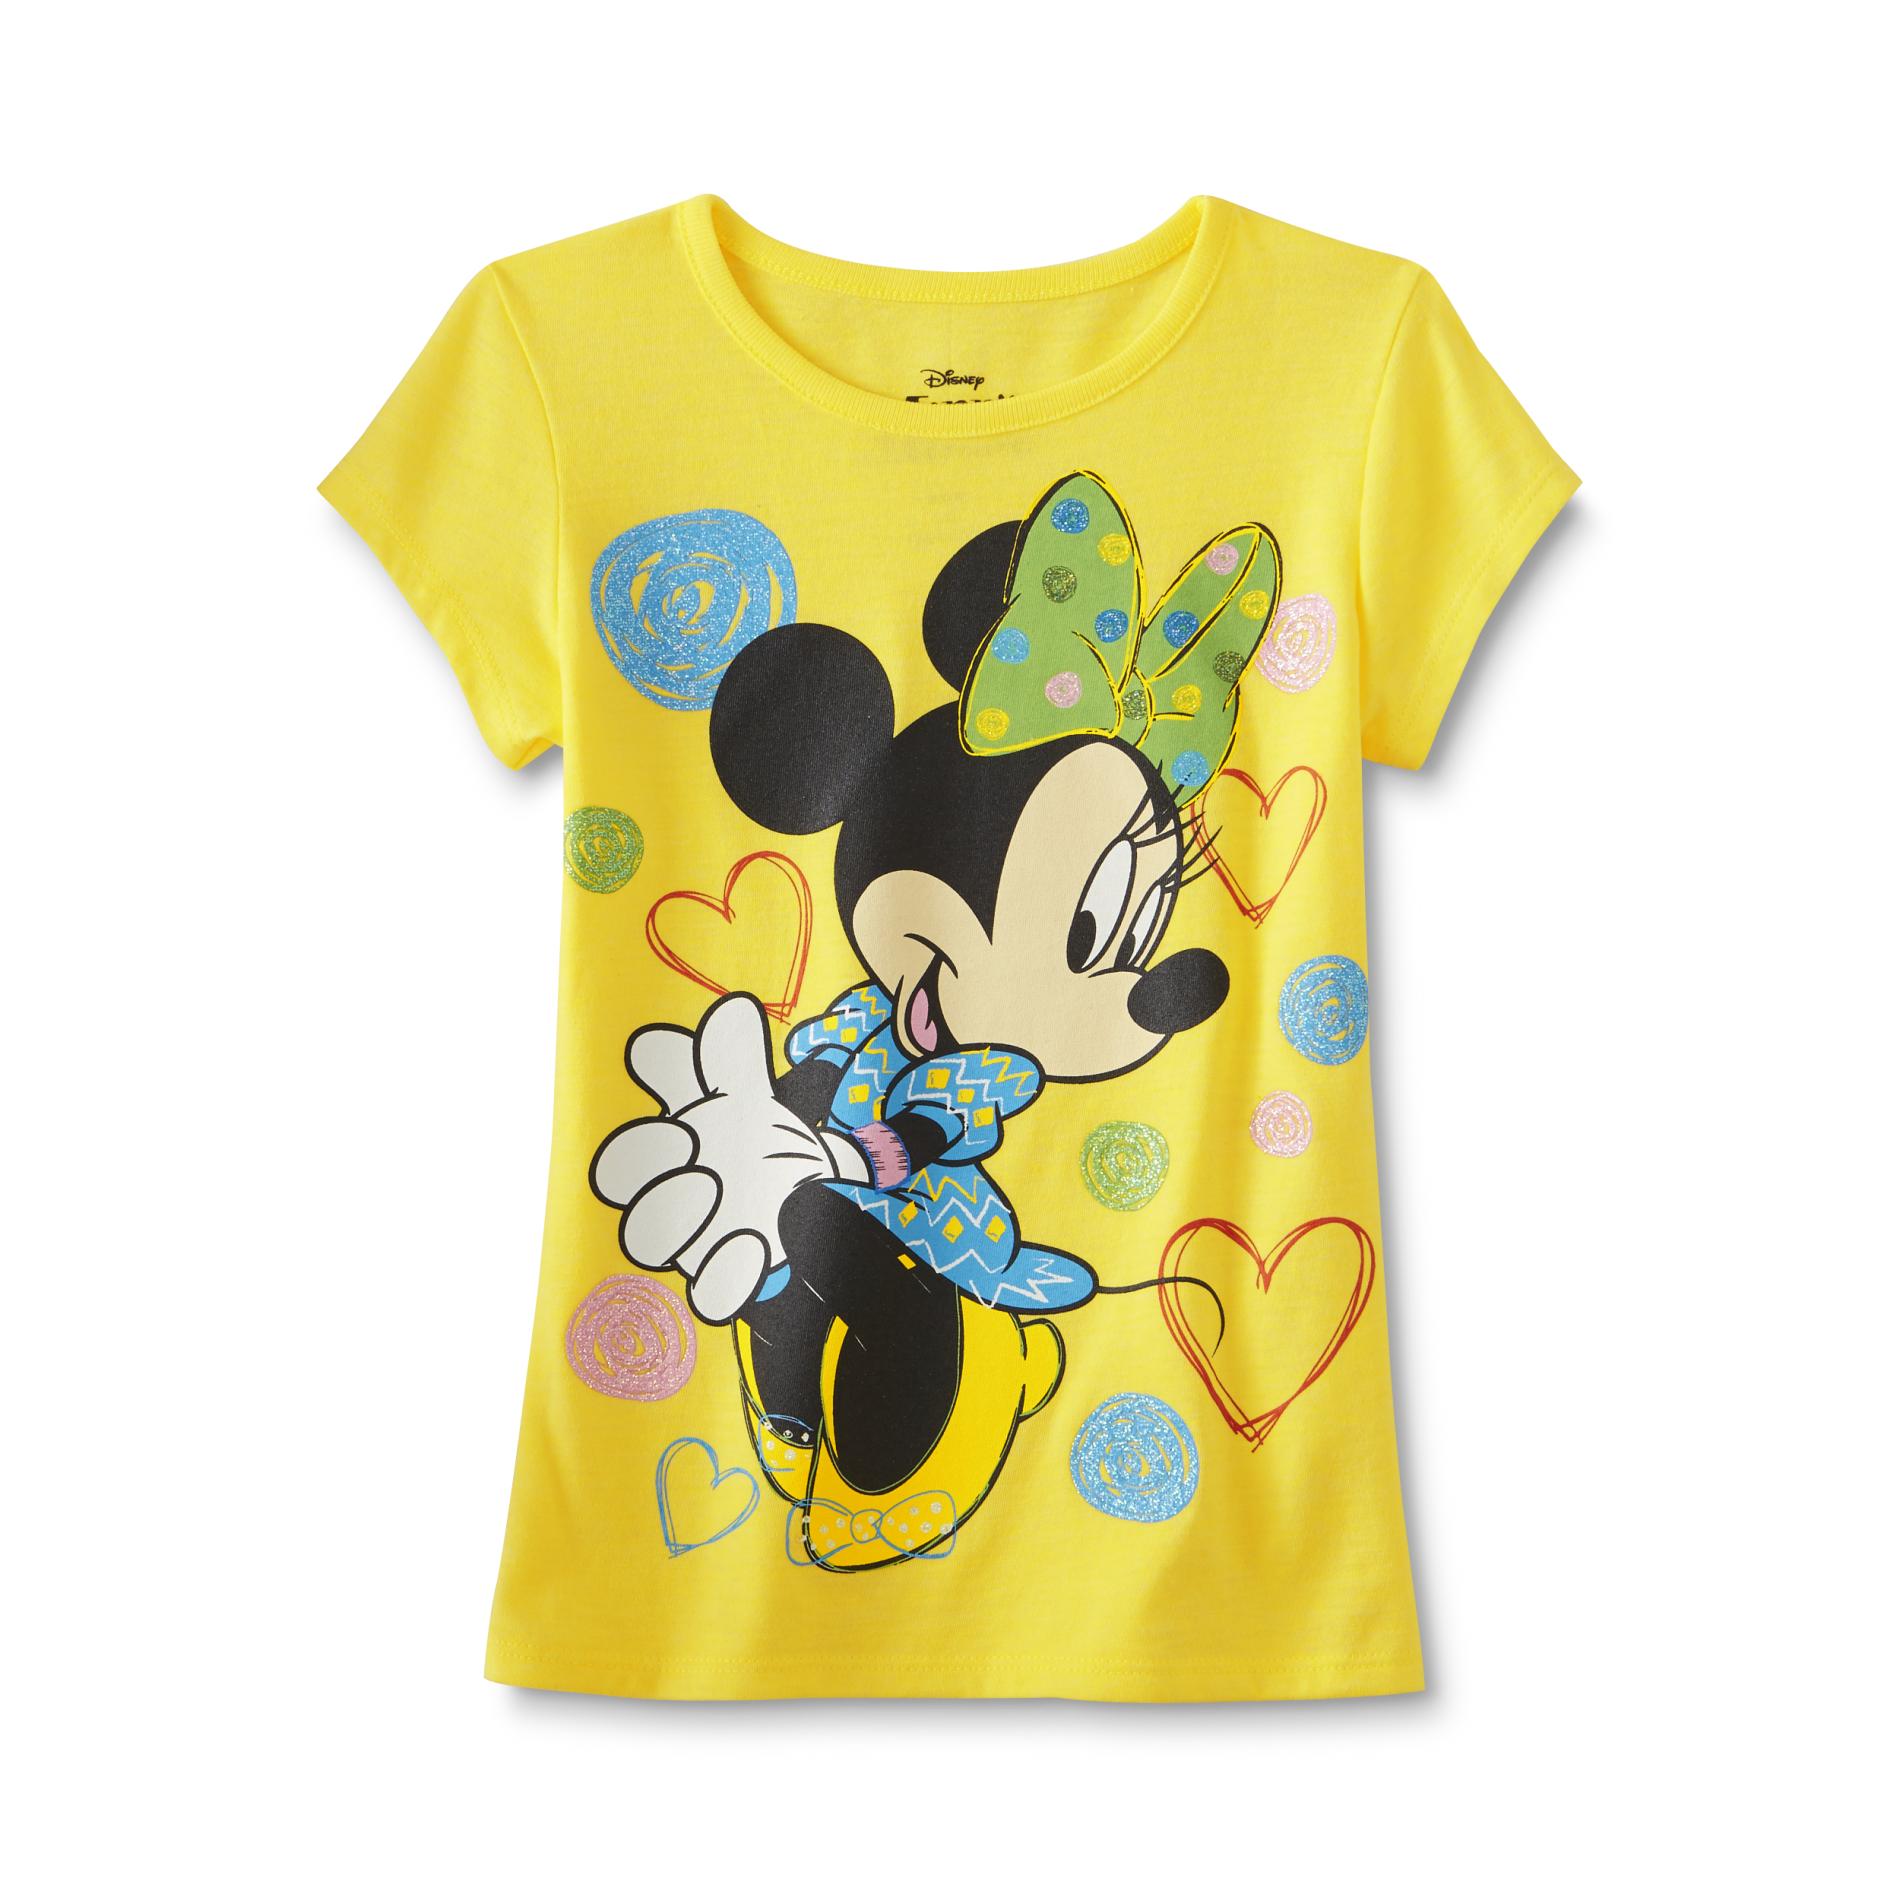 Disney Minnie Mouse Girl's Graphic T-Shirt